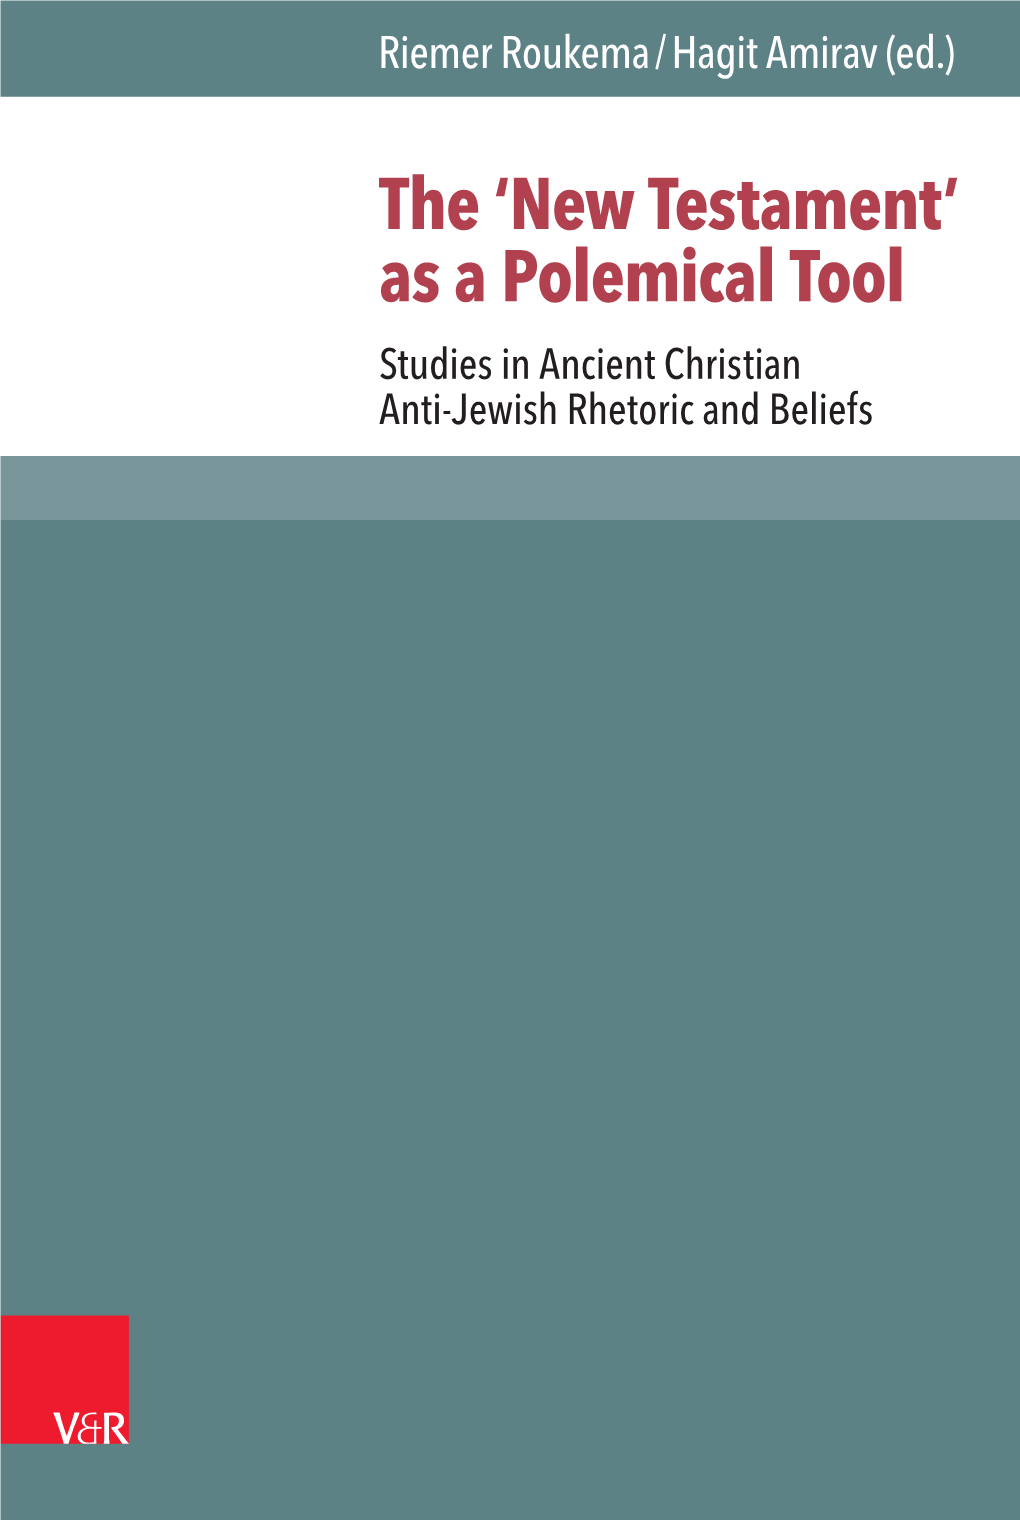 The 'New Testament' As a Polemical Tool